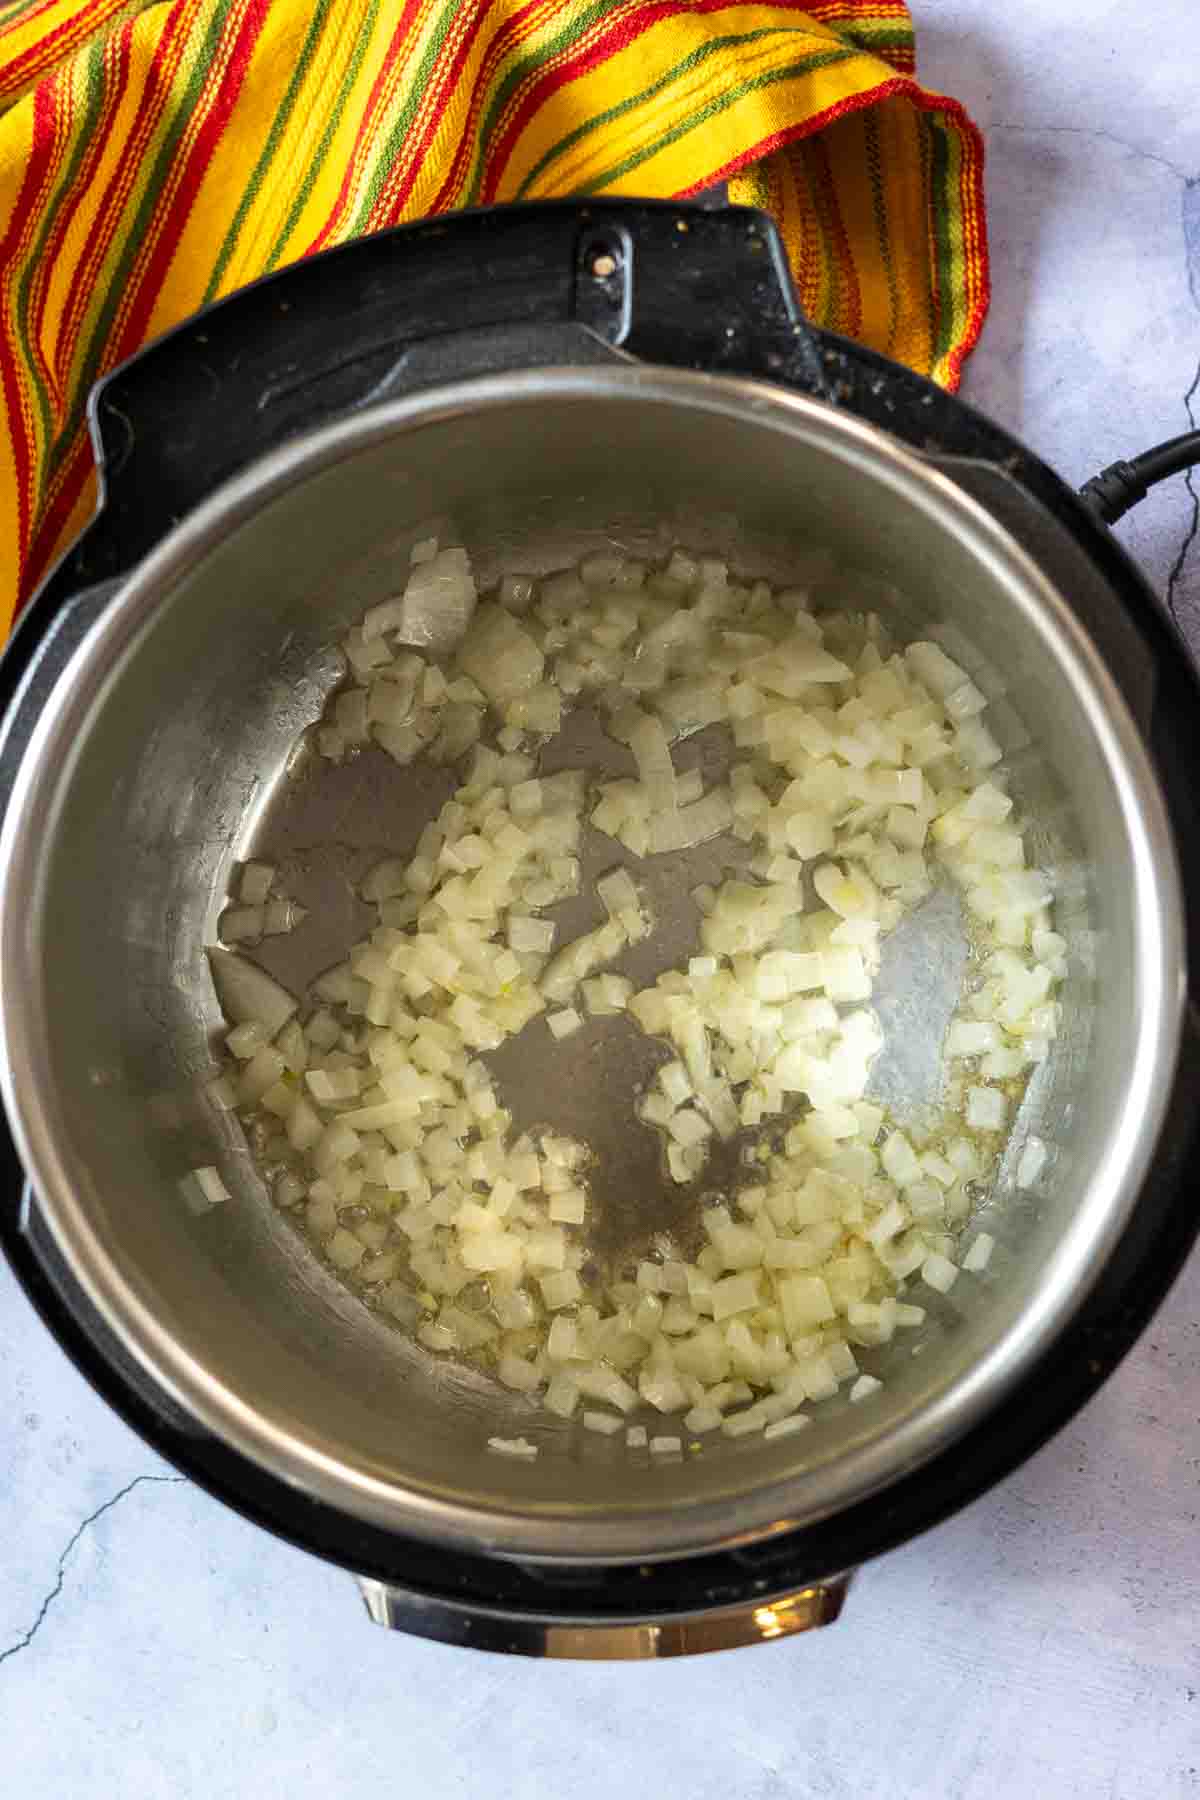 Cooking diced onions in the instant pot.